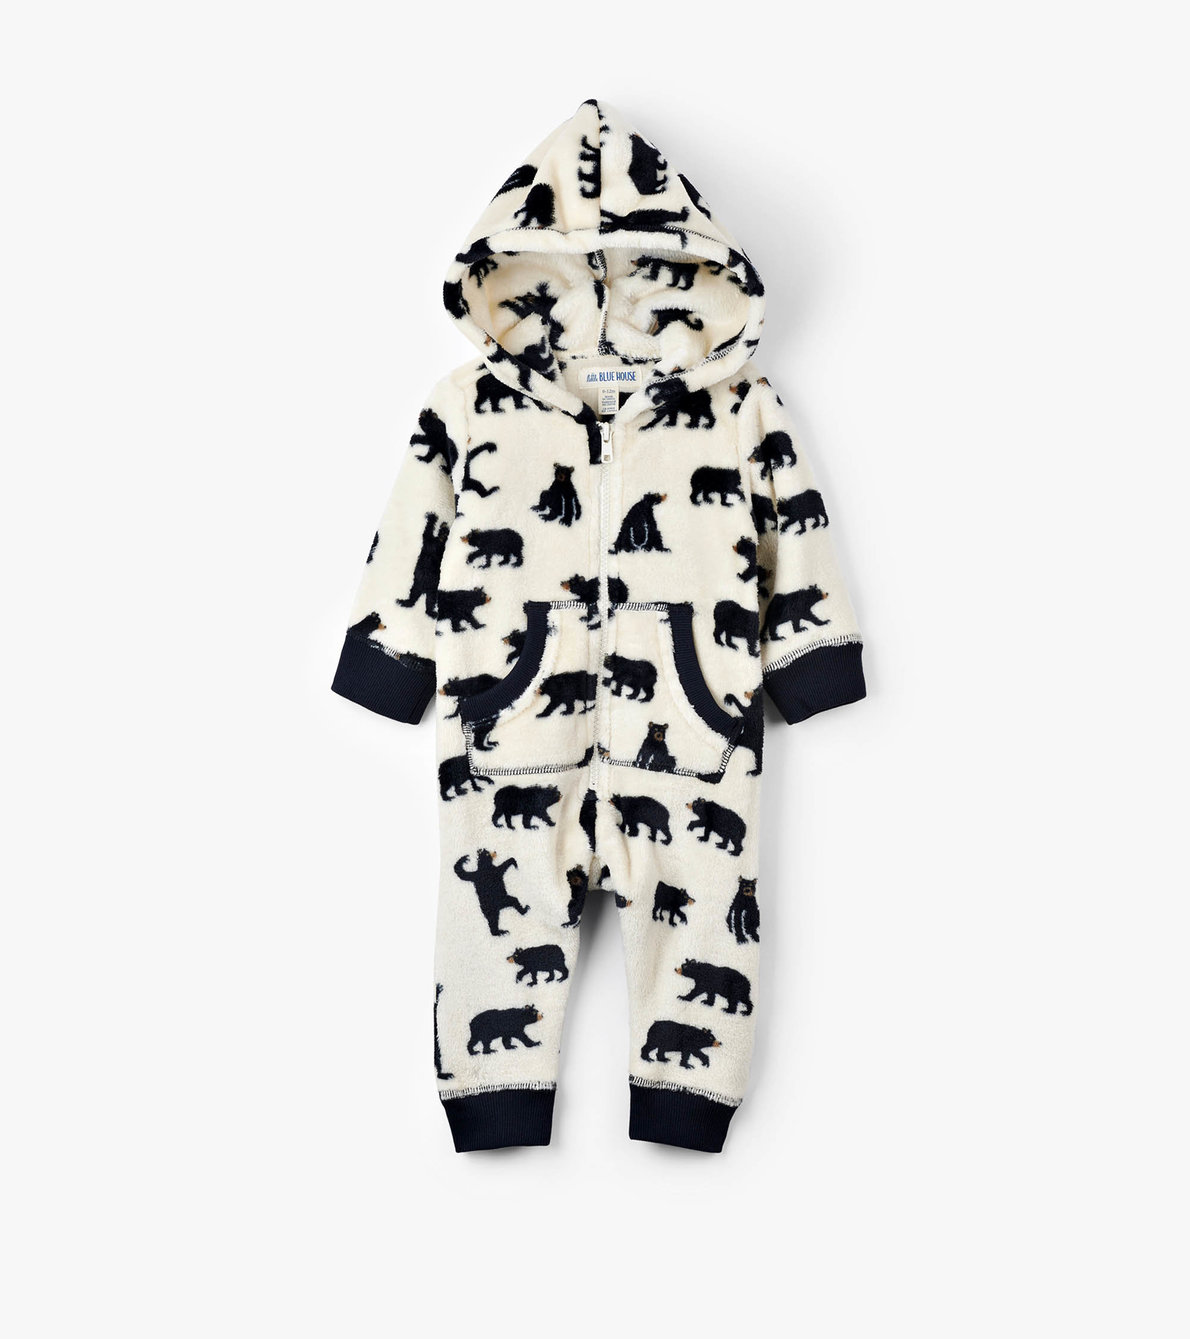 View larger image of Baby Black Bears Hooded Fleece Jumpsuit